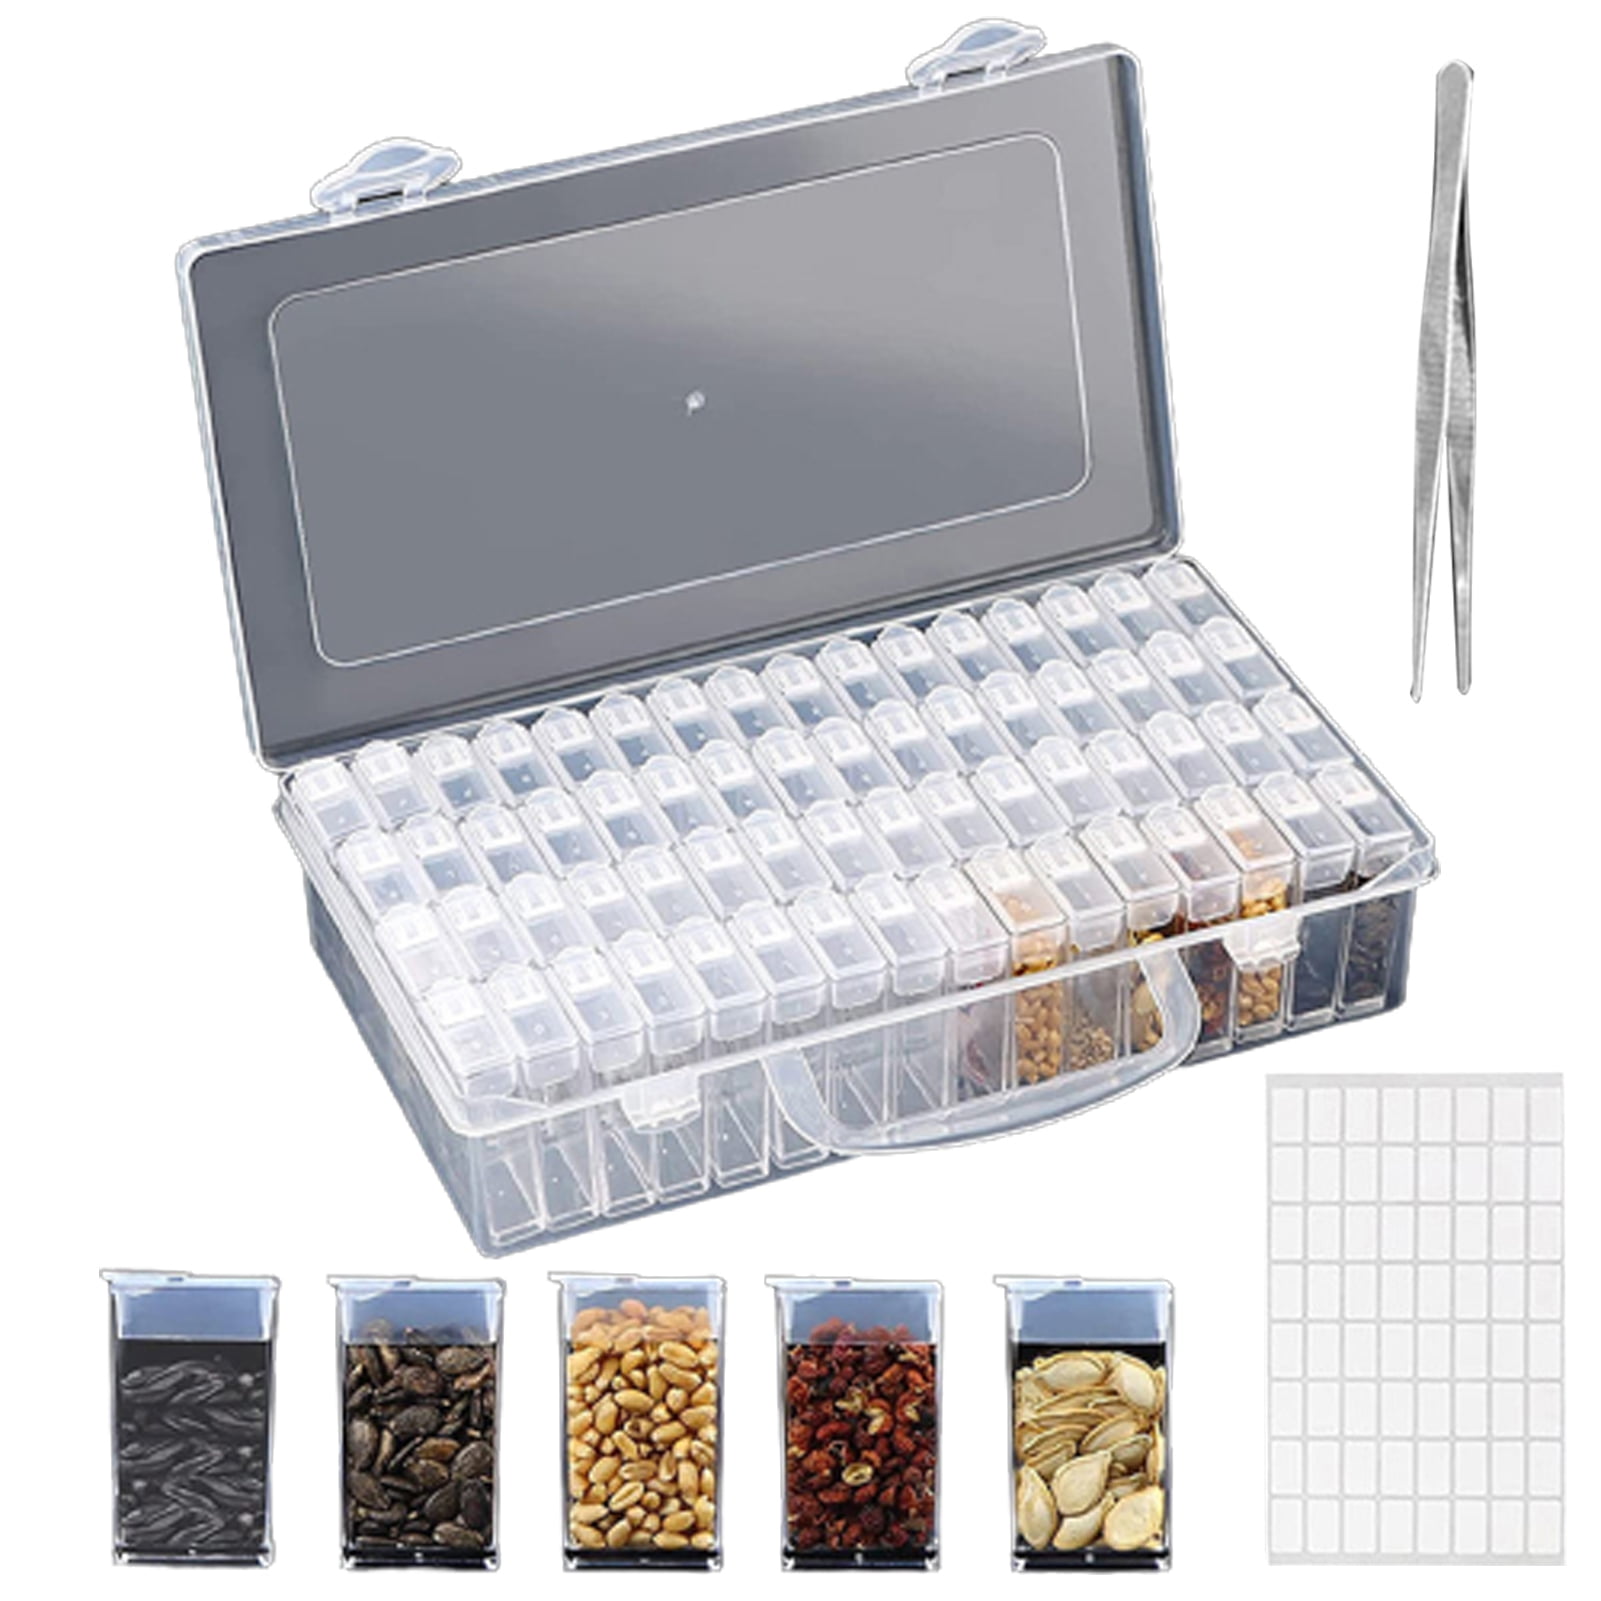 Seed Storage Box, 64 Slots Seed Organizer with Label Stickers Garden Seed  Storage Clear Organizer Storage Box for Categorizing Storing Seed Diamonds